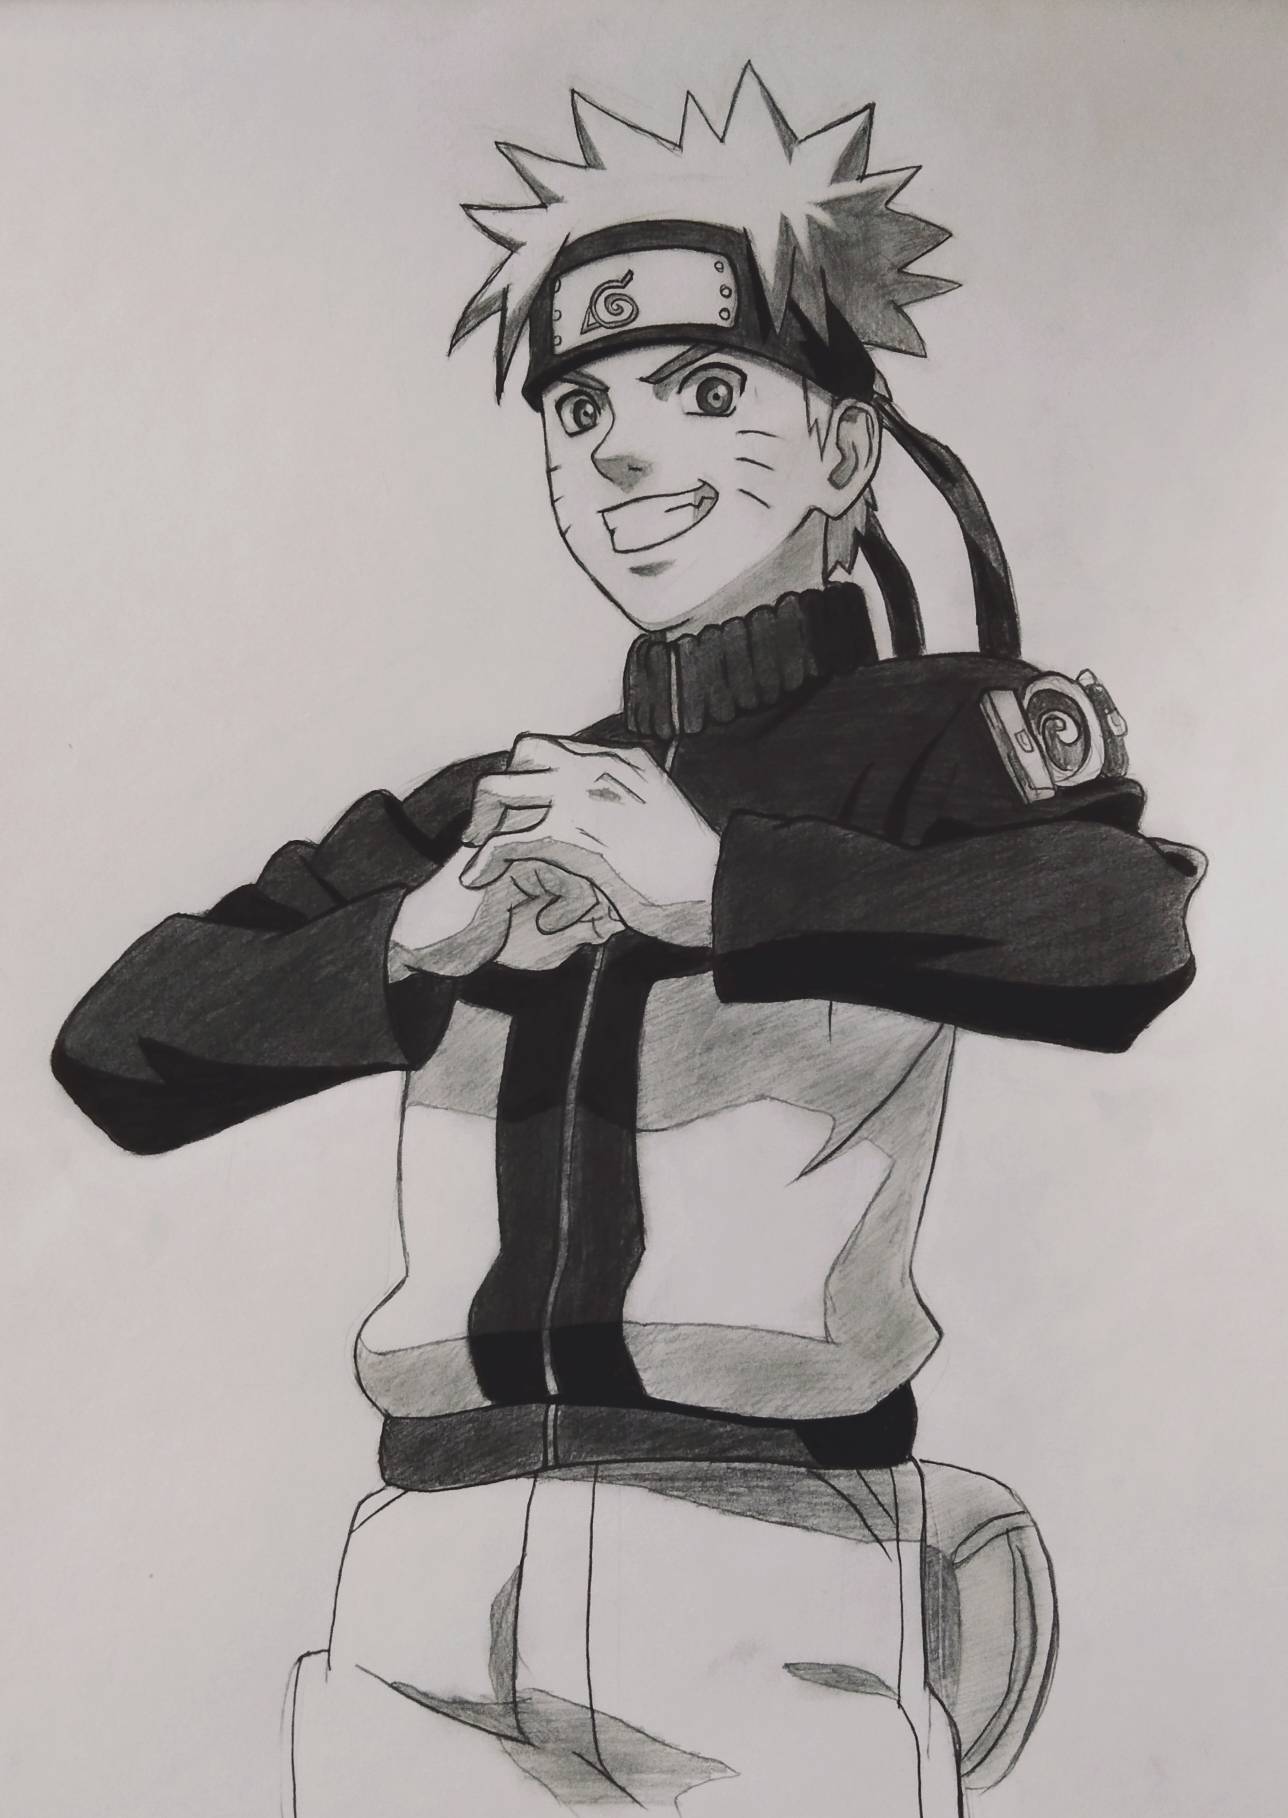 naruto. pencil sketch by kxartist on